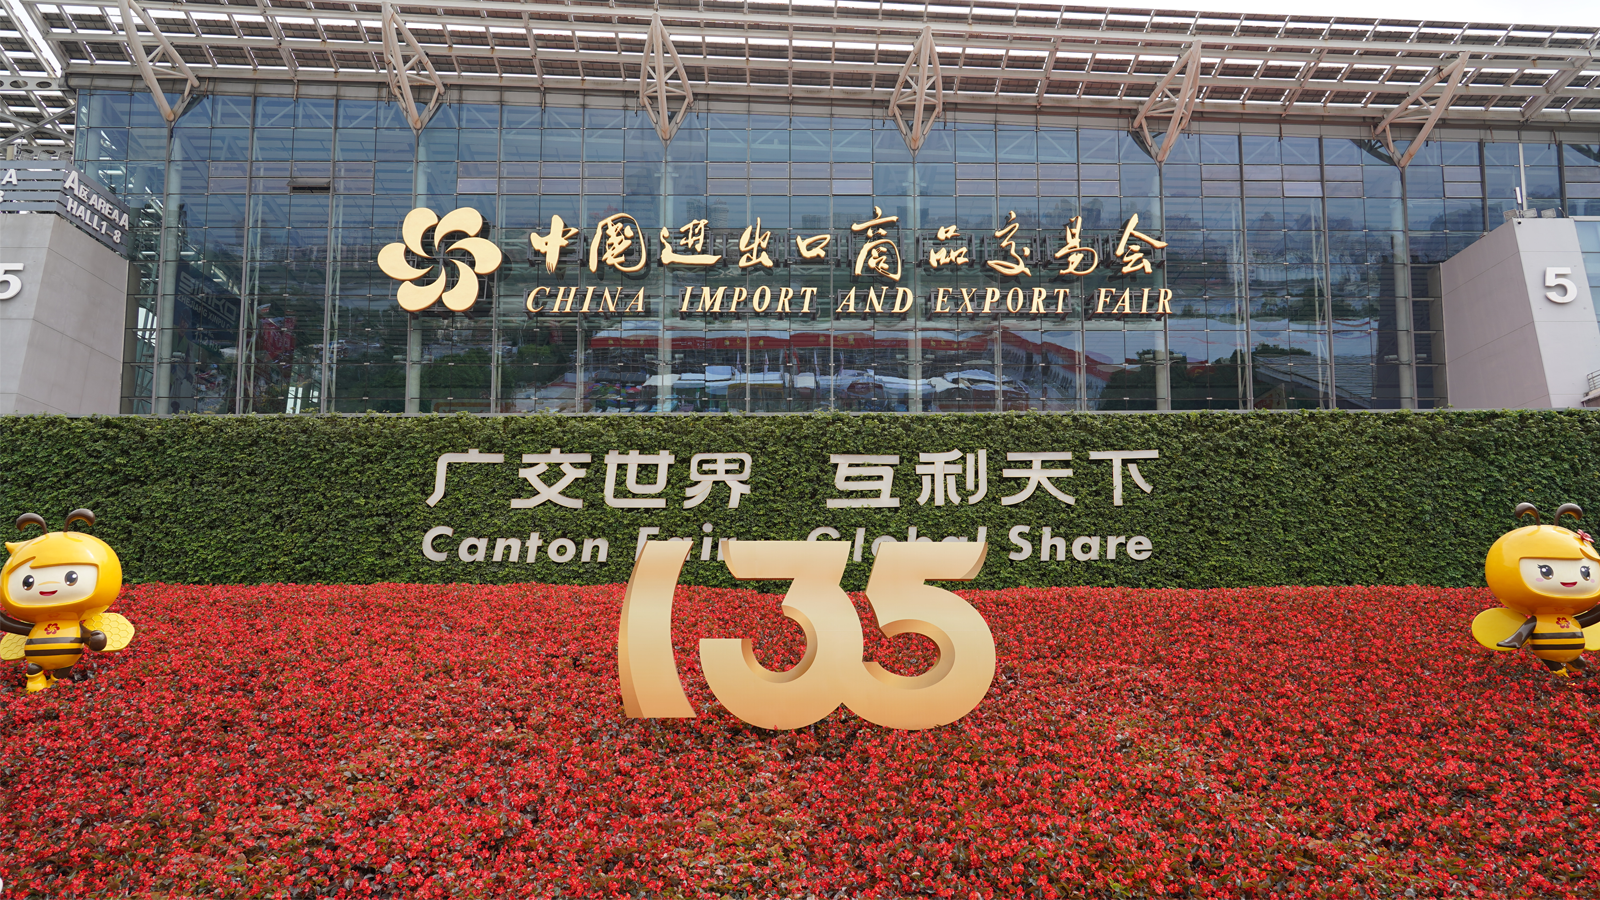 Qunfeng Machinery attends the 135th Canton Fair, showcasing stunning new equipment.